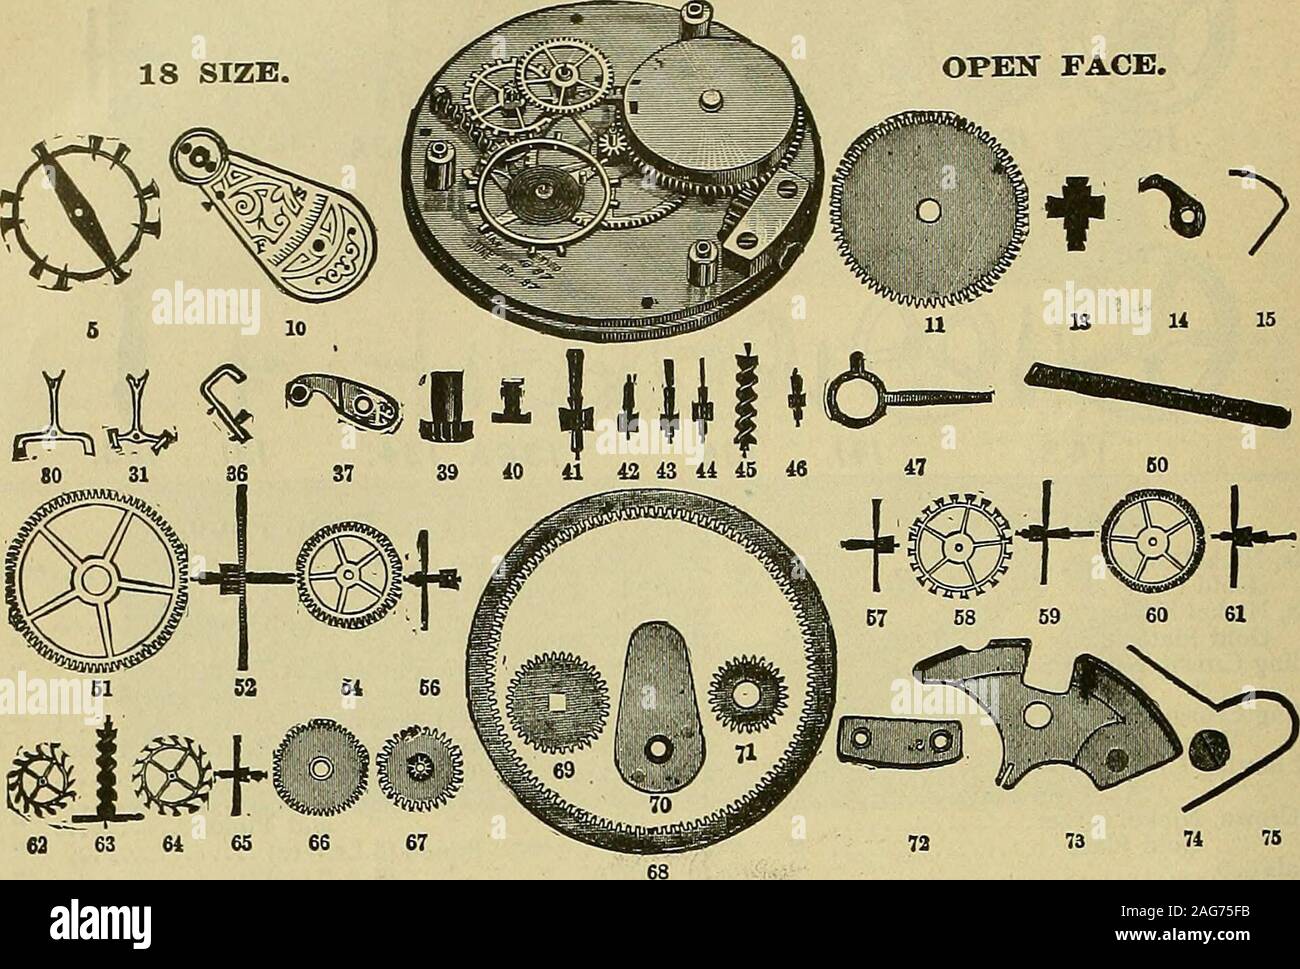 . 20th century catalogue of supplies for watchmakers, jewelers and kindred trades. 10 167 Dials on Plates, Arabic, plain 25 168 Roman 25 169 •• Arabic, Sweep 25 170 « Roman, 25 Hunting Case. 173 Dials on Plates, Arabic, plain each, 25 174 • Roman, 25 175 Arabic, Sweep 25 V& Roman, ,.. 25 179 Winding Crown Arbor 15 180 . Wheel 10 181 Hand Setting Crown, Nickel 10 182 GoldPlate 15 183 Stop Crown, Nickel Silver 10 184 GoldPlate 15 185 Crystals 10 186 Spiral Spring for Sweep Second Hand 10 N. X. Chronograph Pash Lever each, $0 SO CHck.... 15Cam Pillar 15 Manhattan, New York, Chronograph Material. Stock Photo